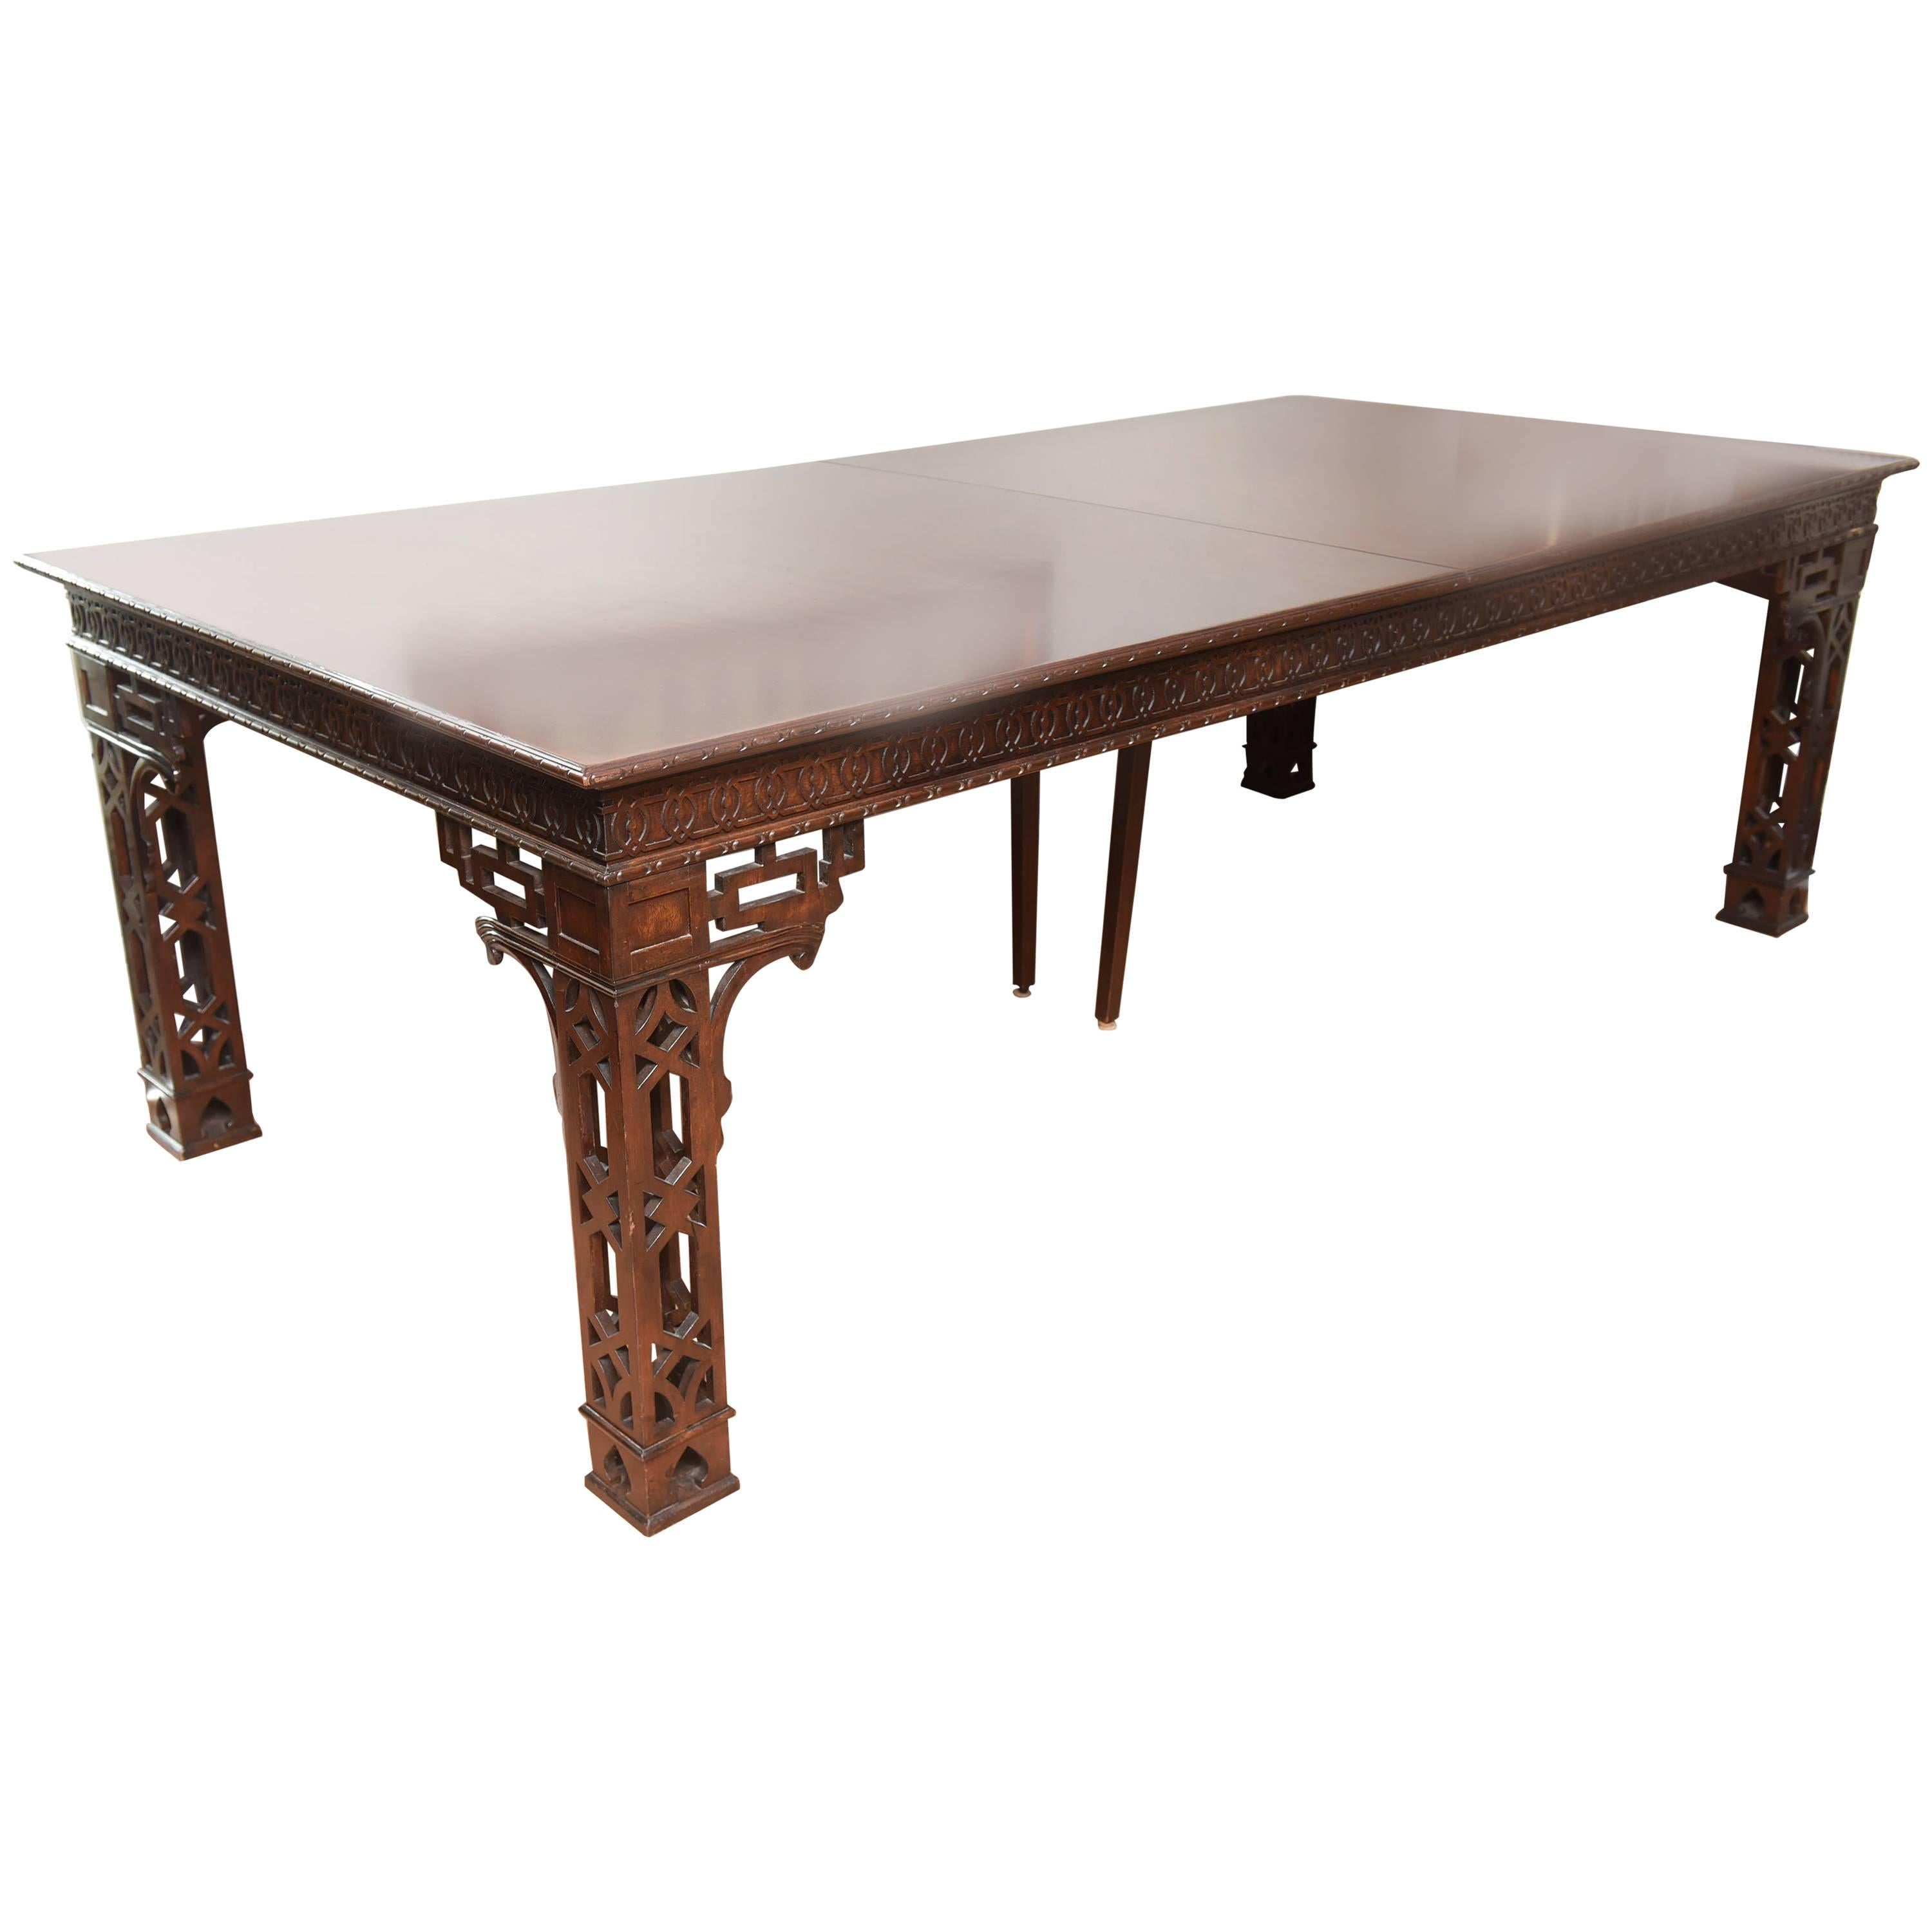 Vintage Chinese Chippendale Dining/Conference Table